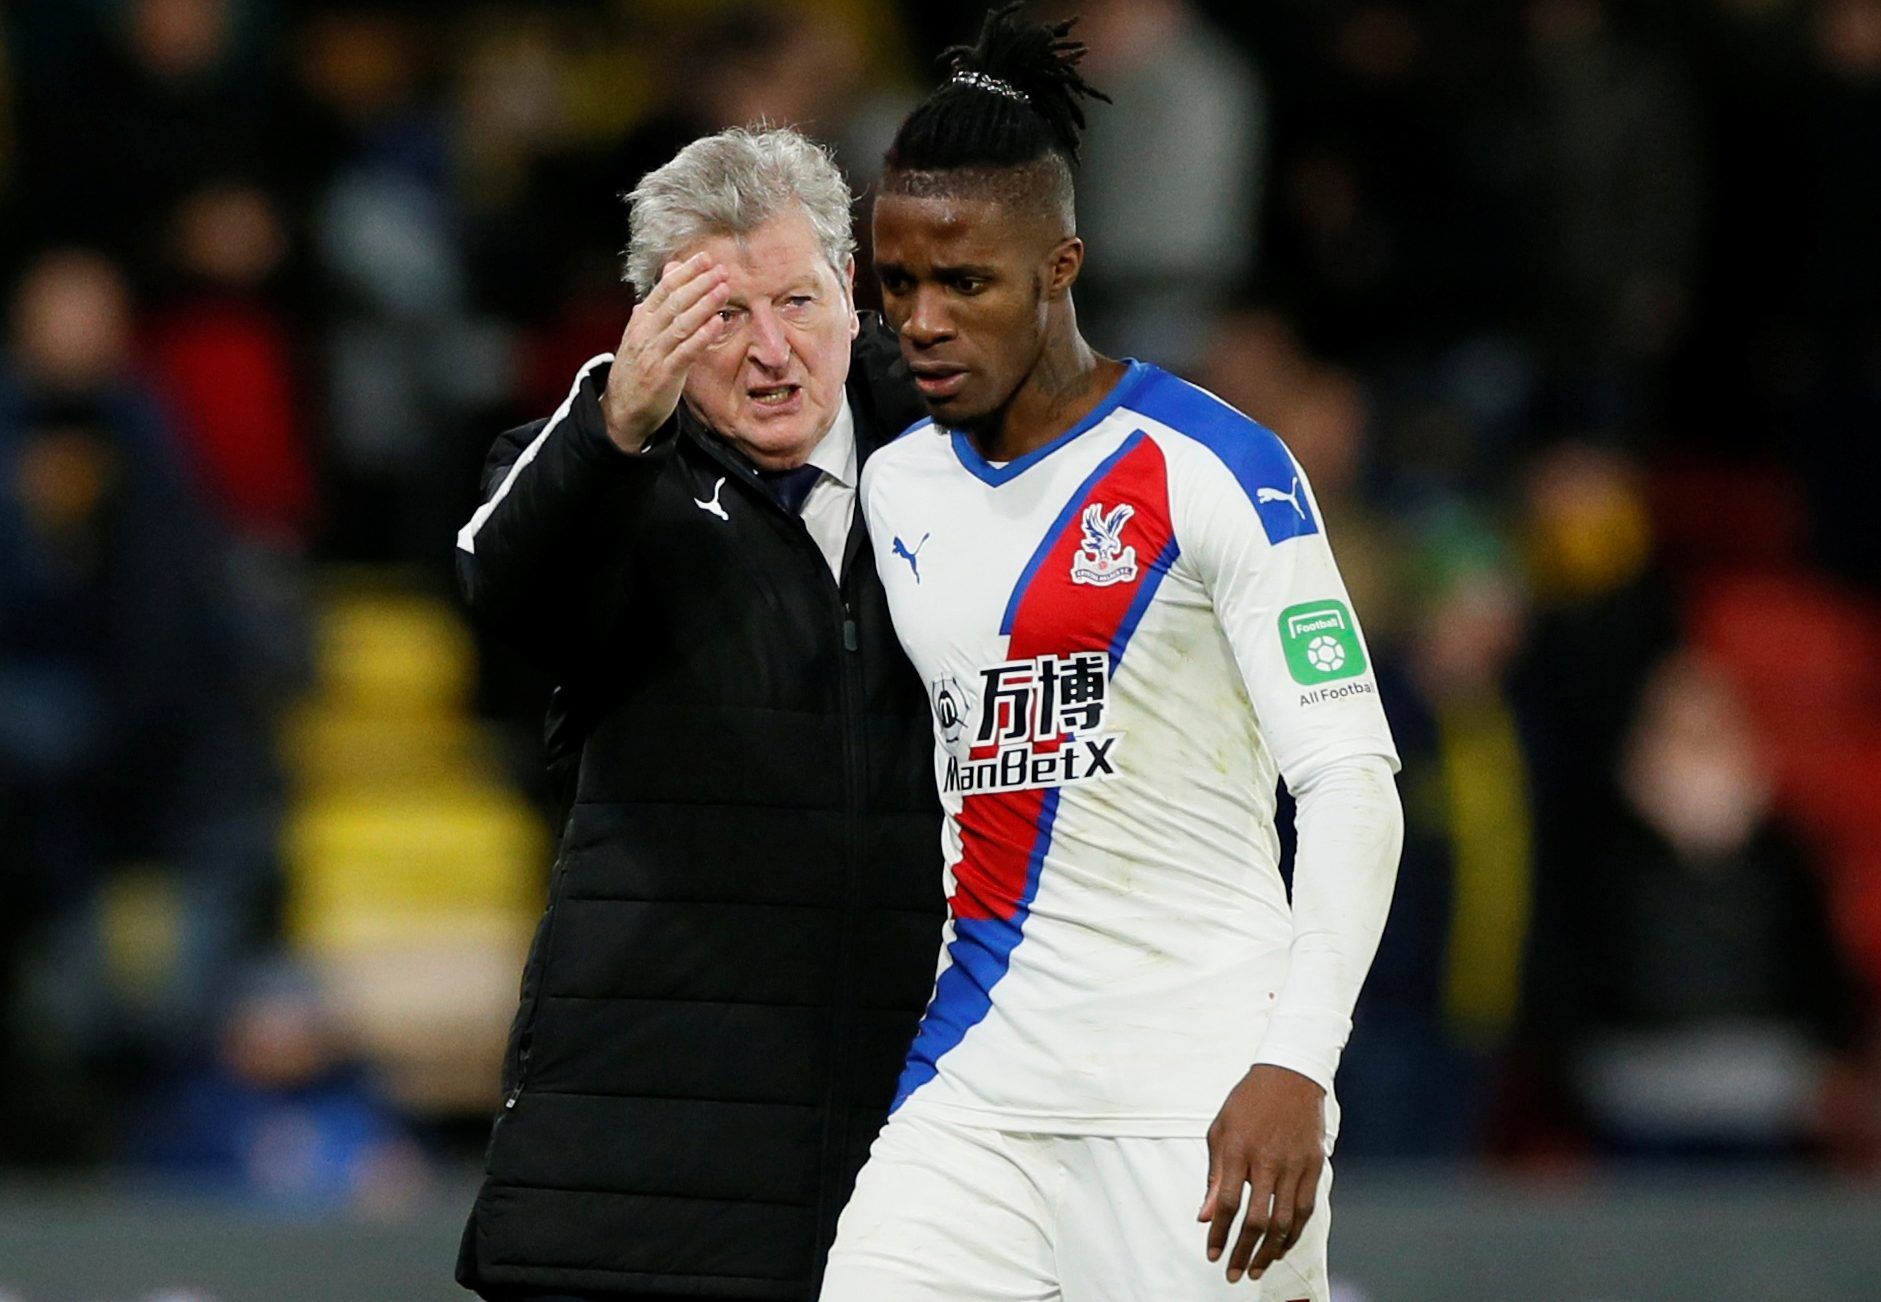 Soccer Football - Premier League - Watford v Crystal Palace - Vicarage Road, Watford, Britain - December 7, 2019  Crystal Palace manager Roy Hodgson speaks with Crystal Palace's Wilfried Zaha after the match          REUTERS/David Klein  EDITORIAL USE ONLY. No use with unauthorized audio, video, data, fixture lists, club/league logos or 